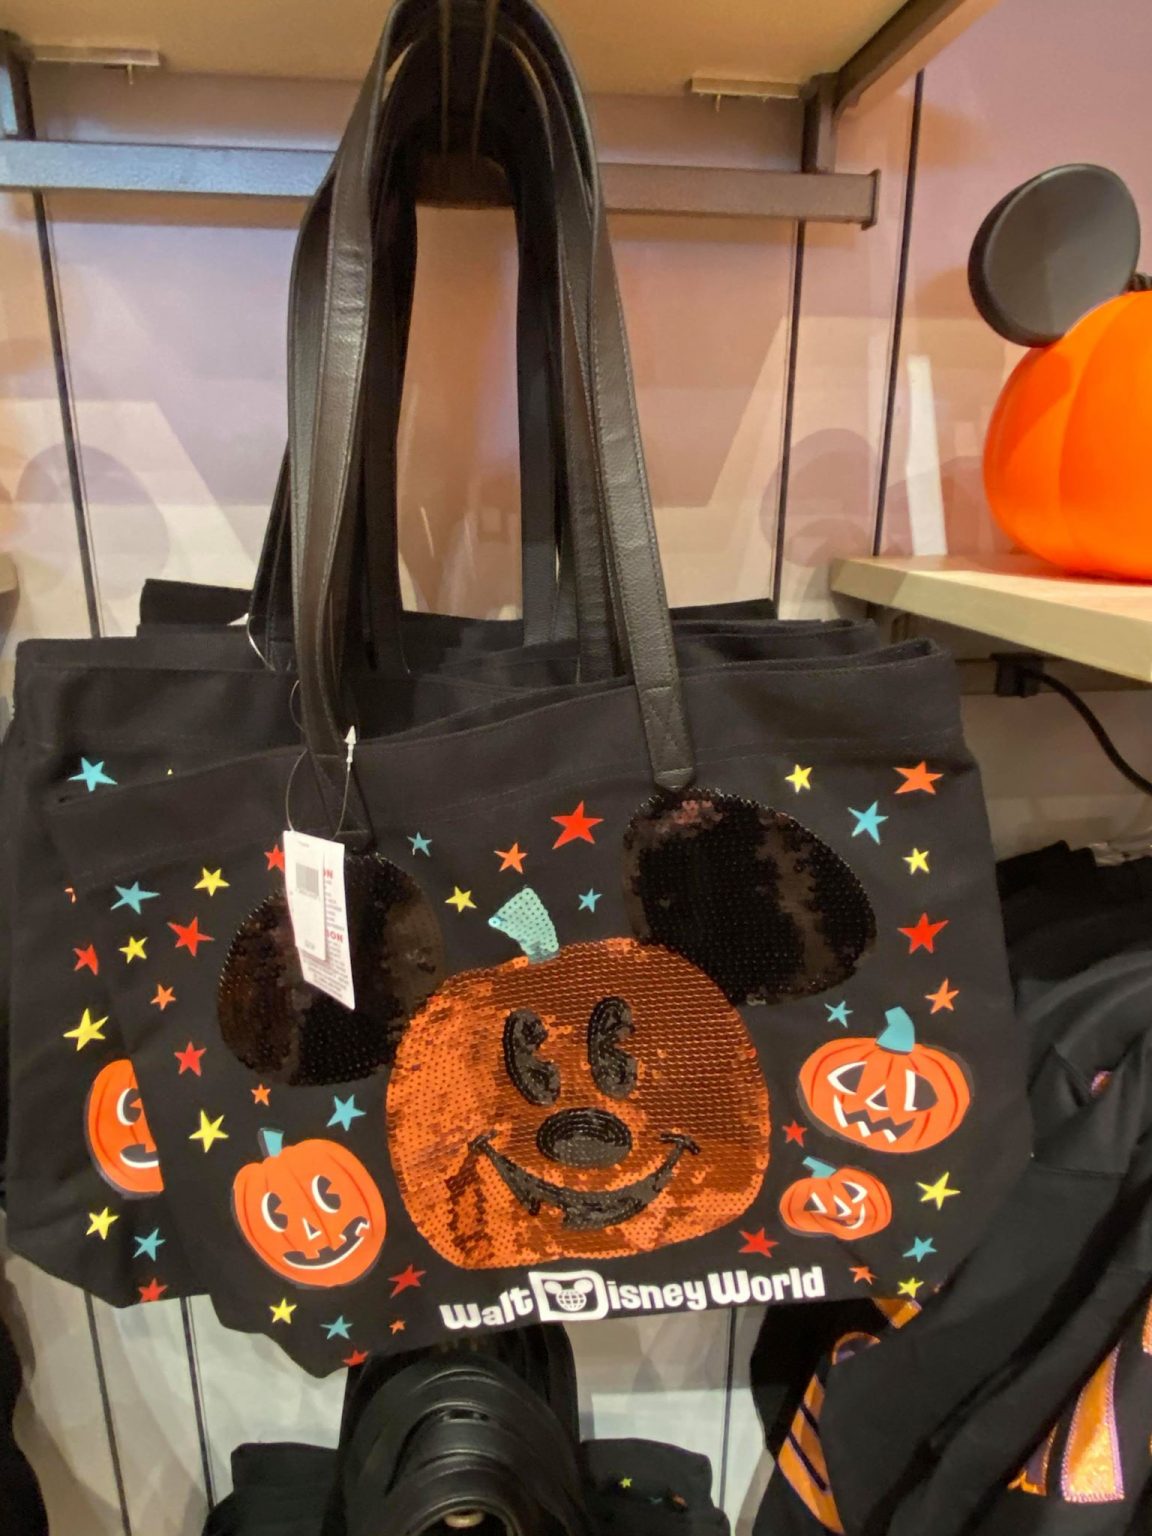 Check out these Spooktacular Halloween Bags and Totes at World of